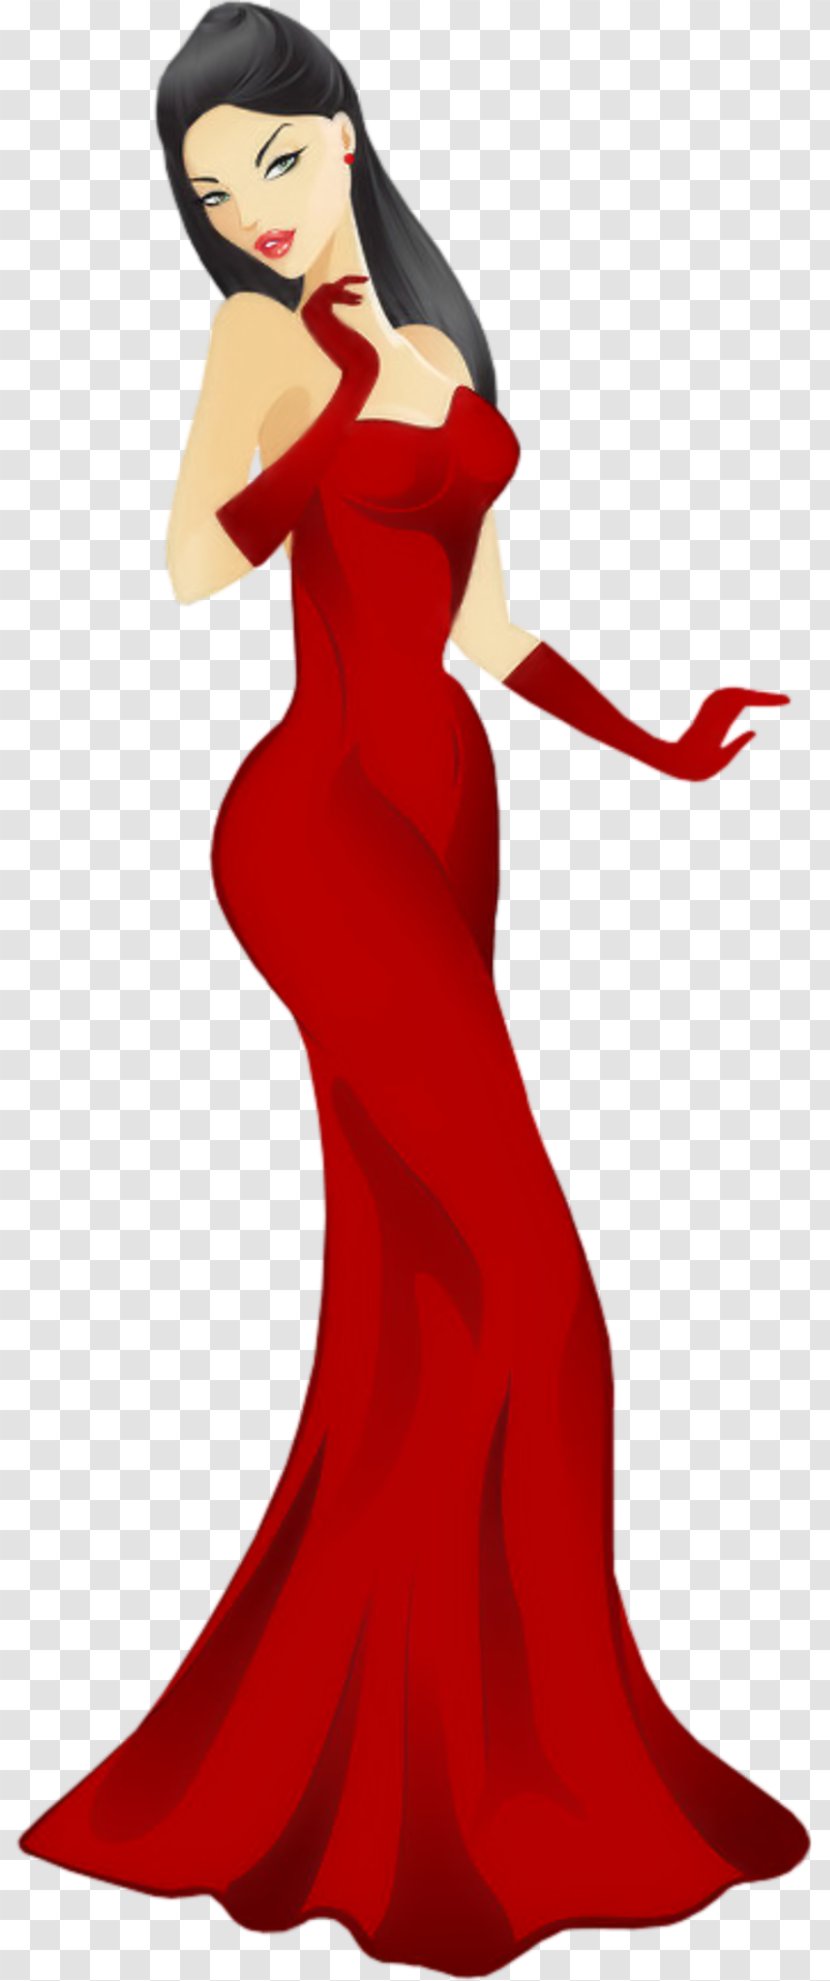 Sabah Betty Boop Cartoon - Lady In Gown Transparent PNG